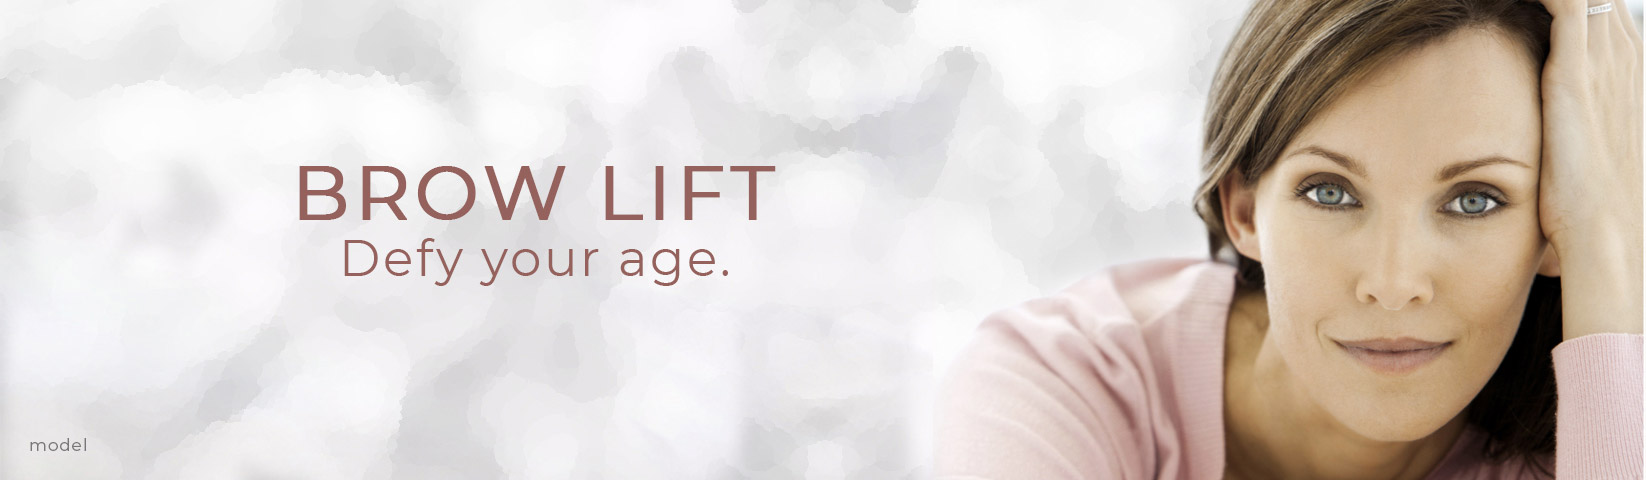 Brow Lift: Defy your age